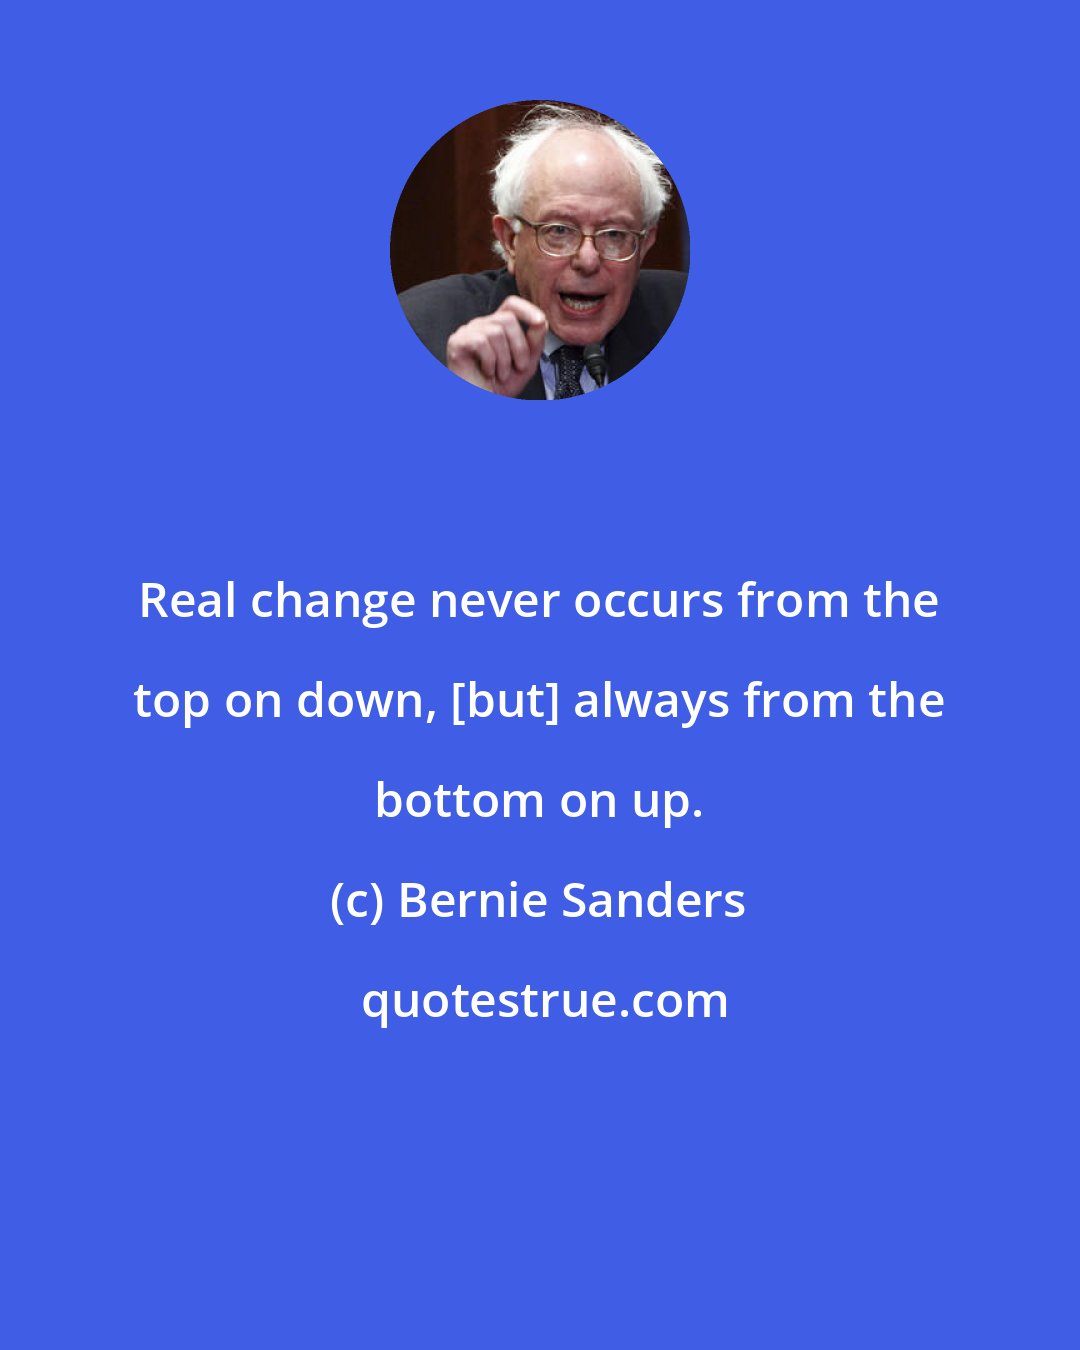 Bernie Sanders: Real change never occurs from the top on down, [but] always from the bottom on up.